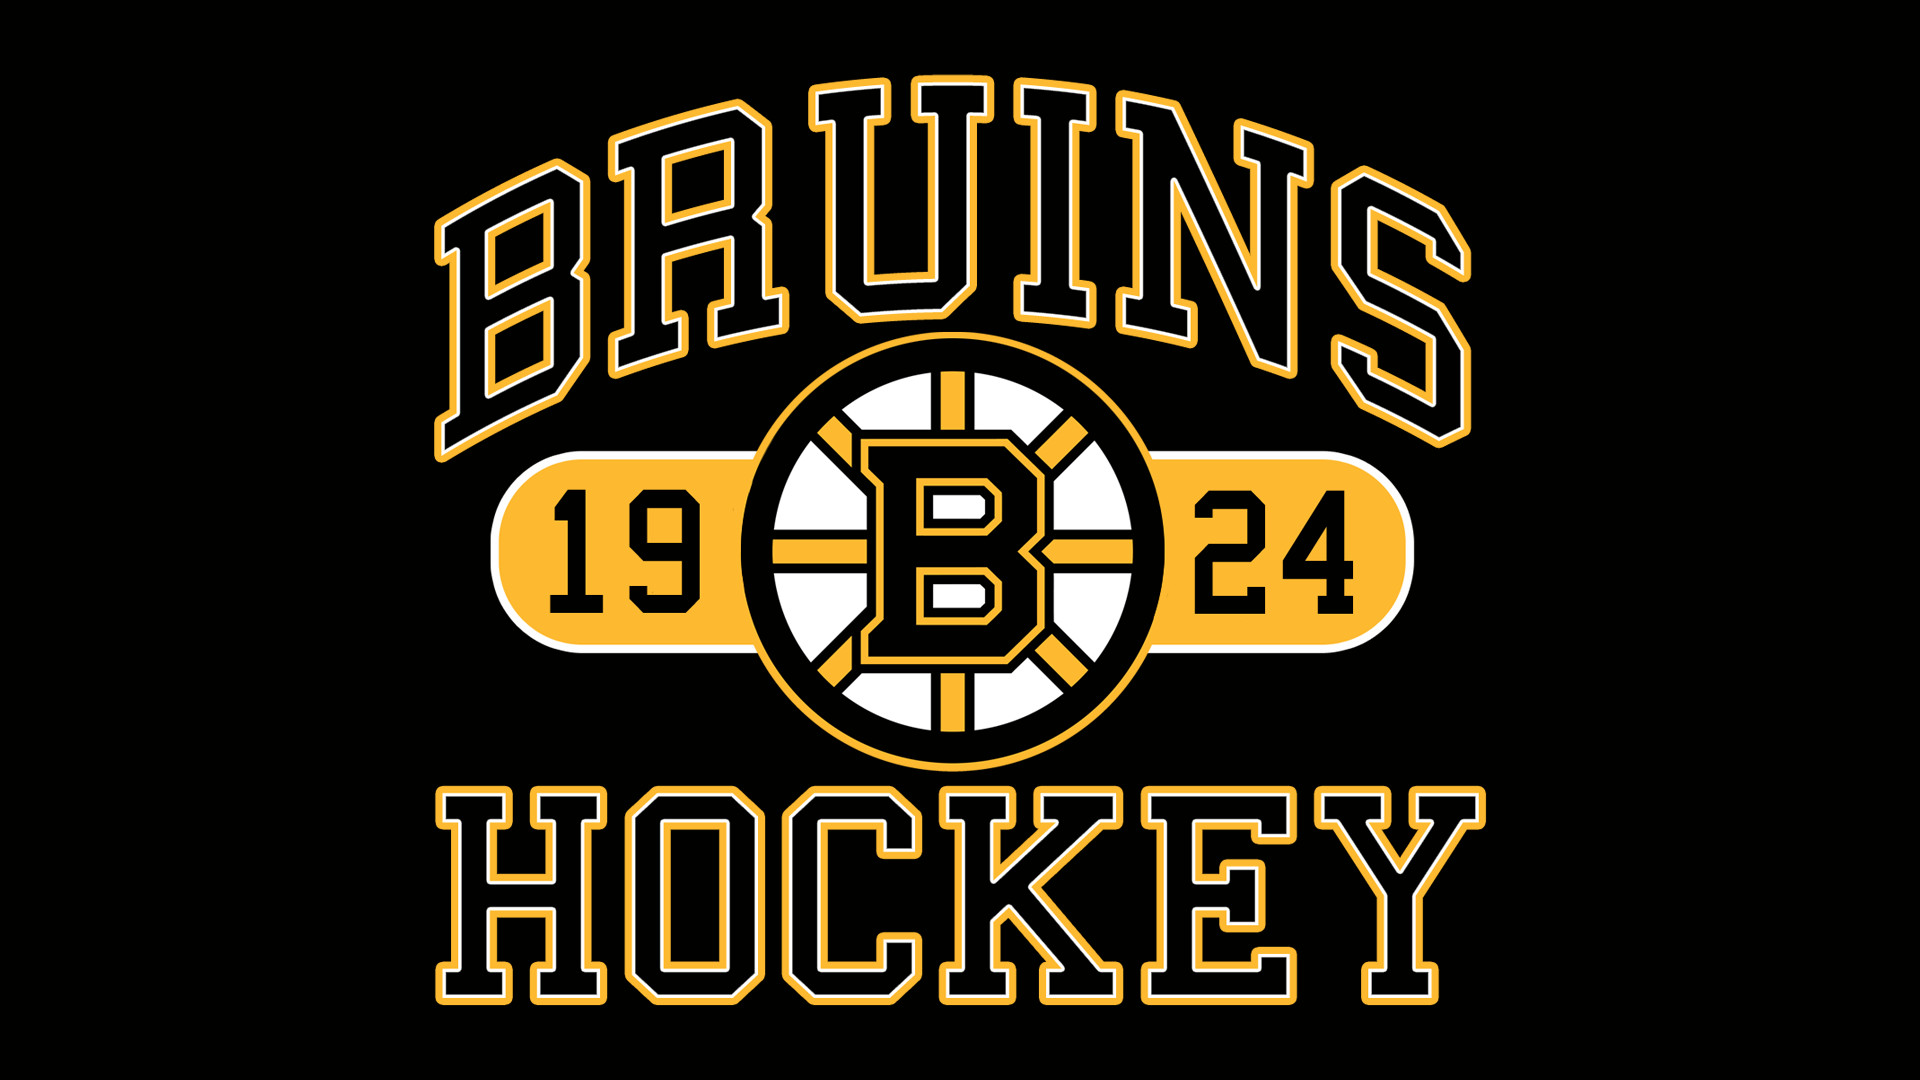 I made some Bruins mobile wallpapers check my comment for a black and  reverse retro version  rBostonBruins